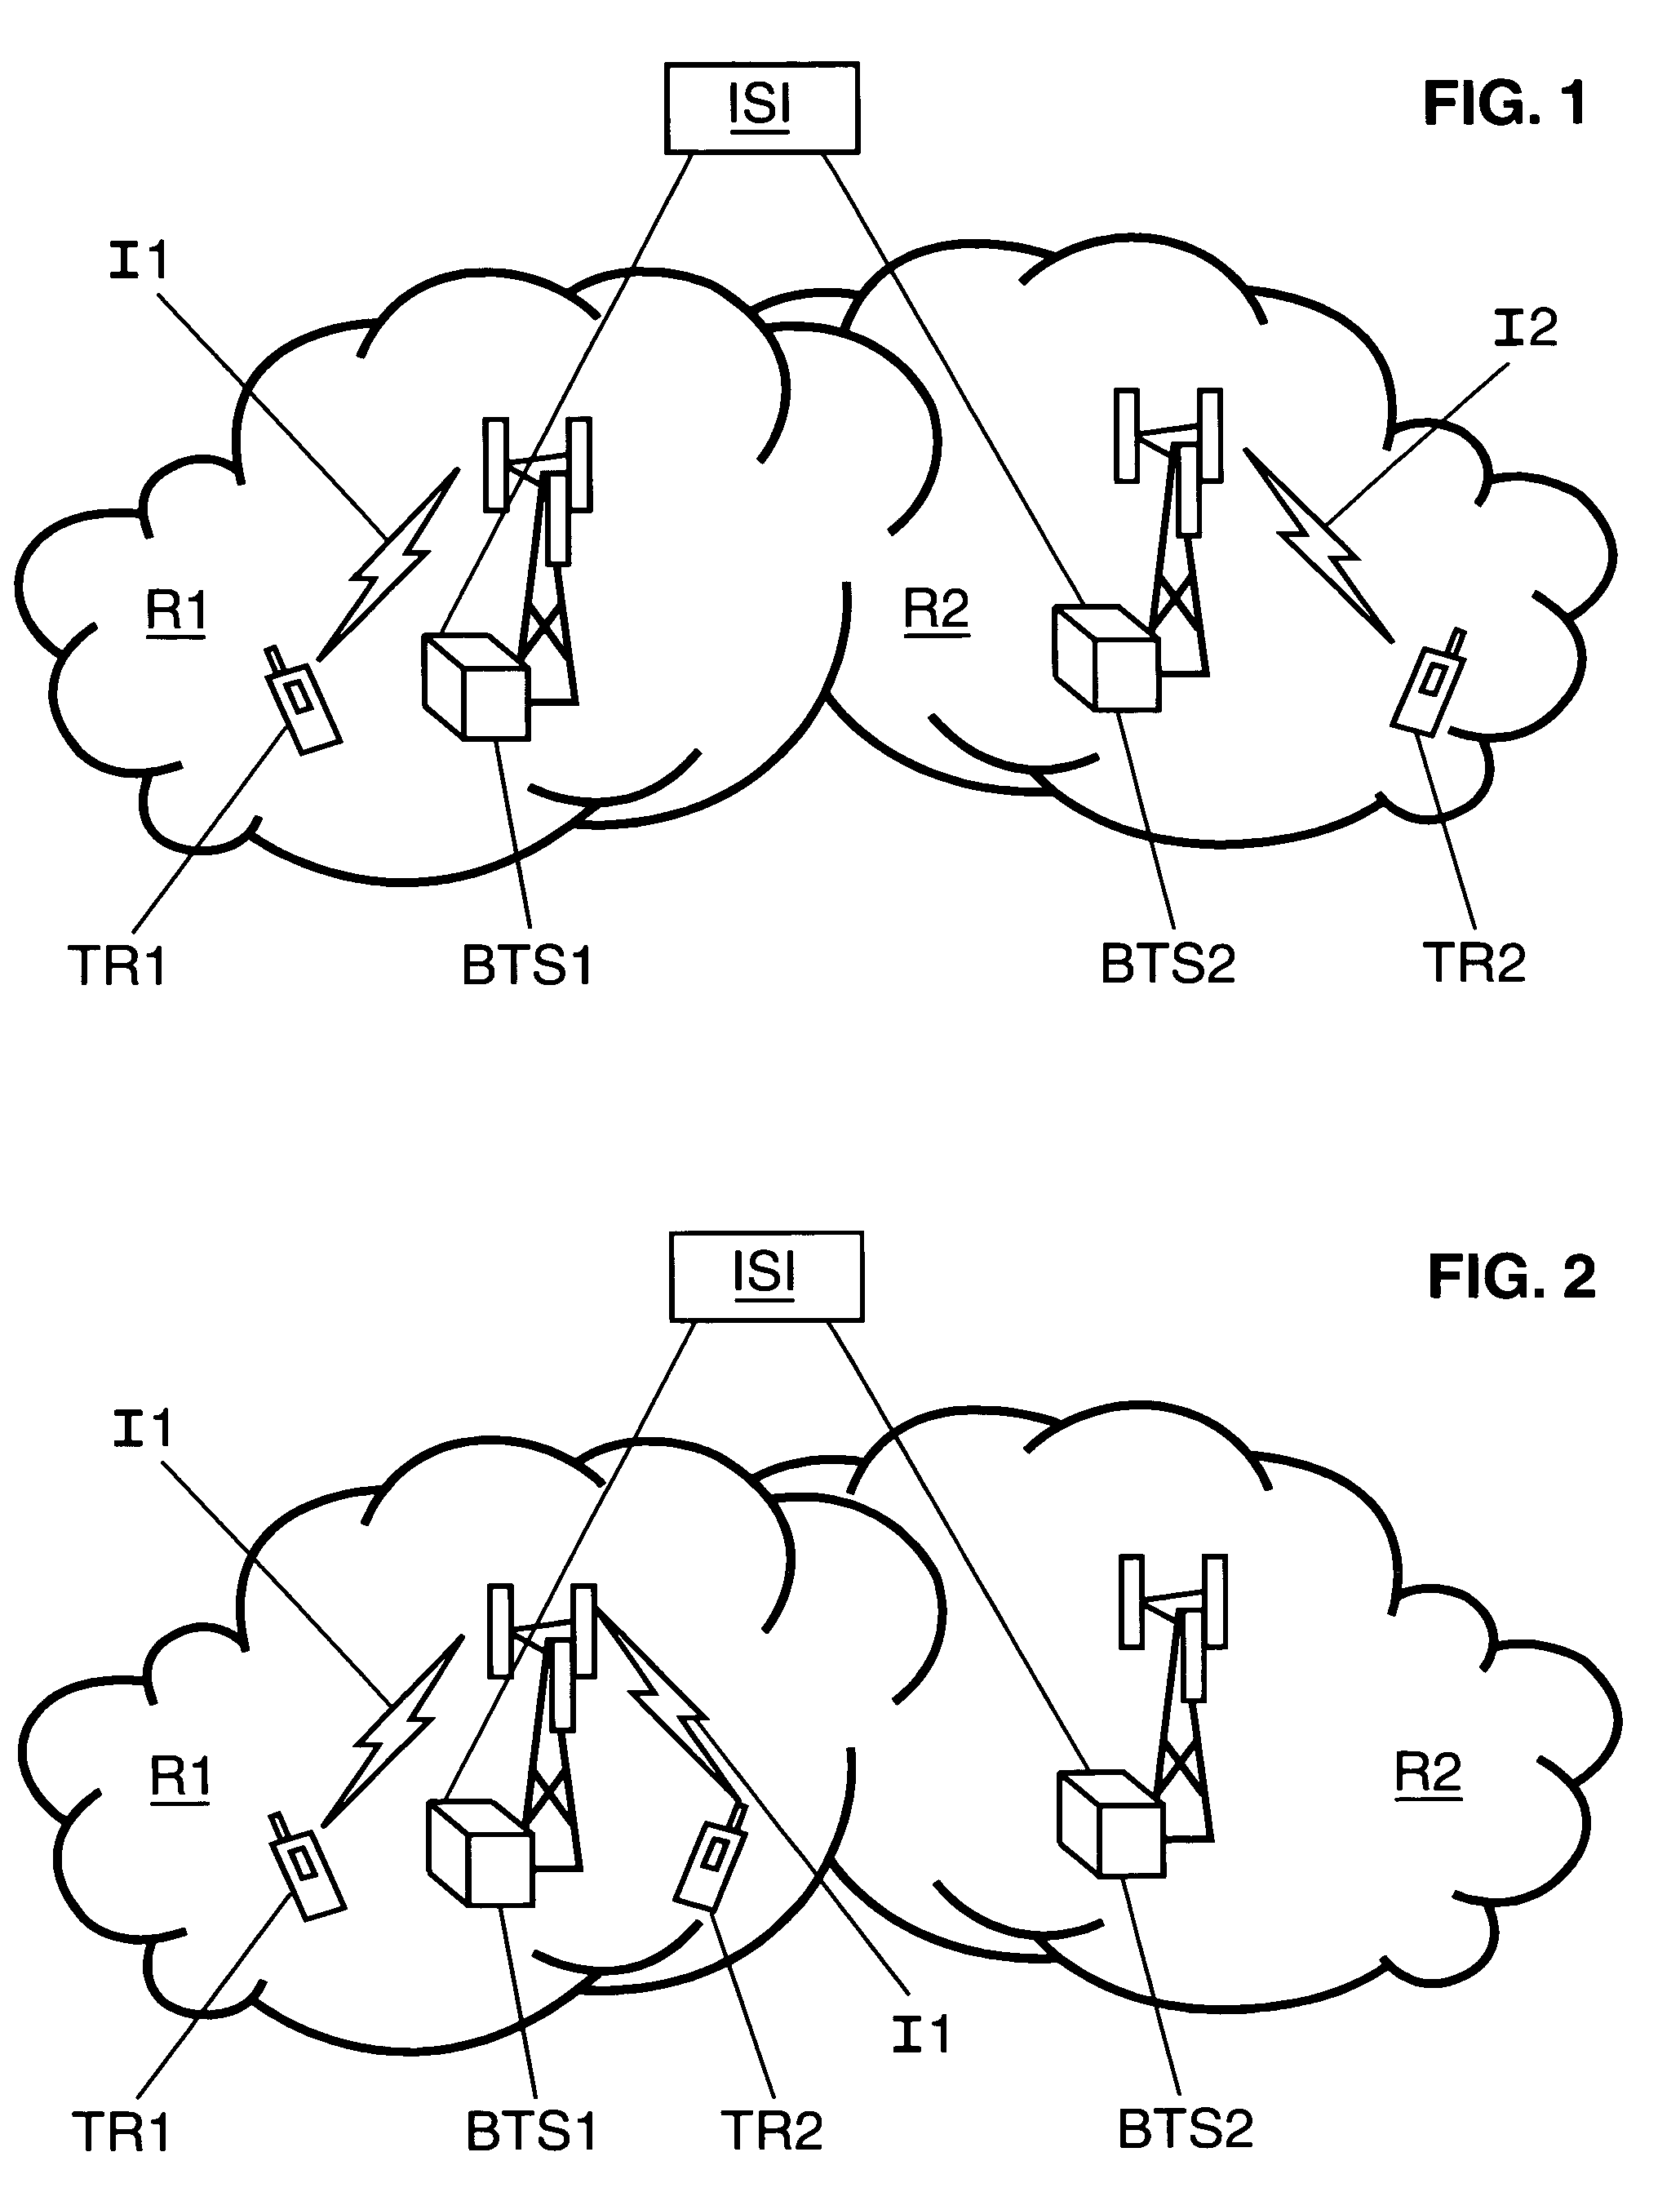 Method for allocating radio resources, base station for carrying out such method, and system incorporating same